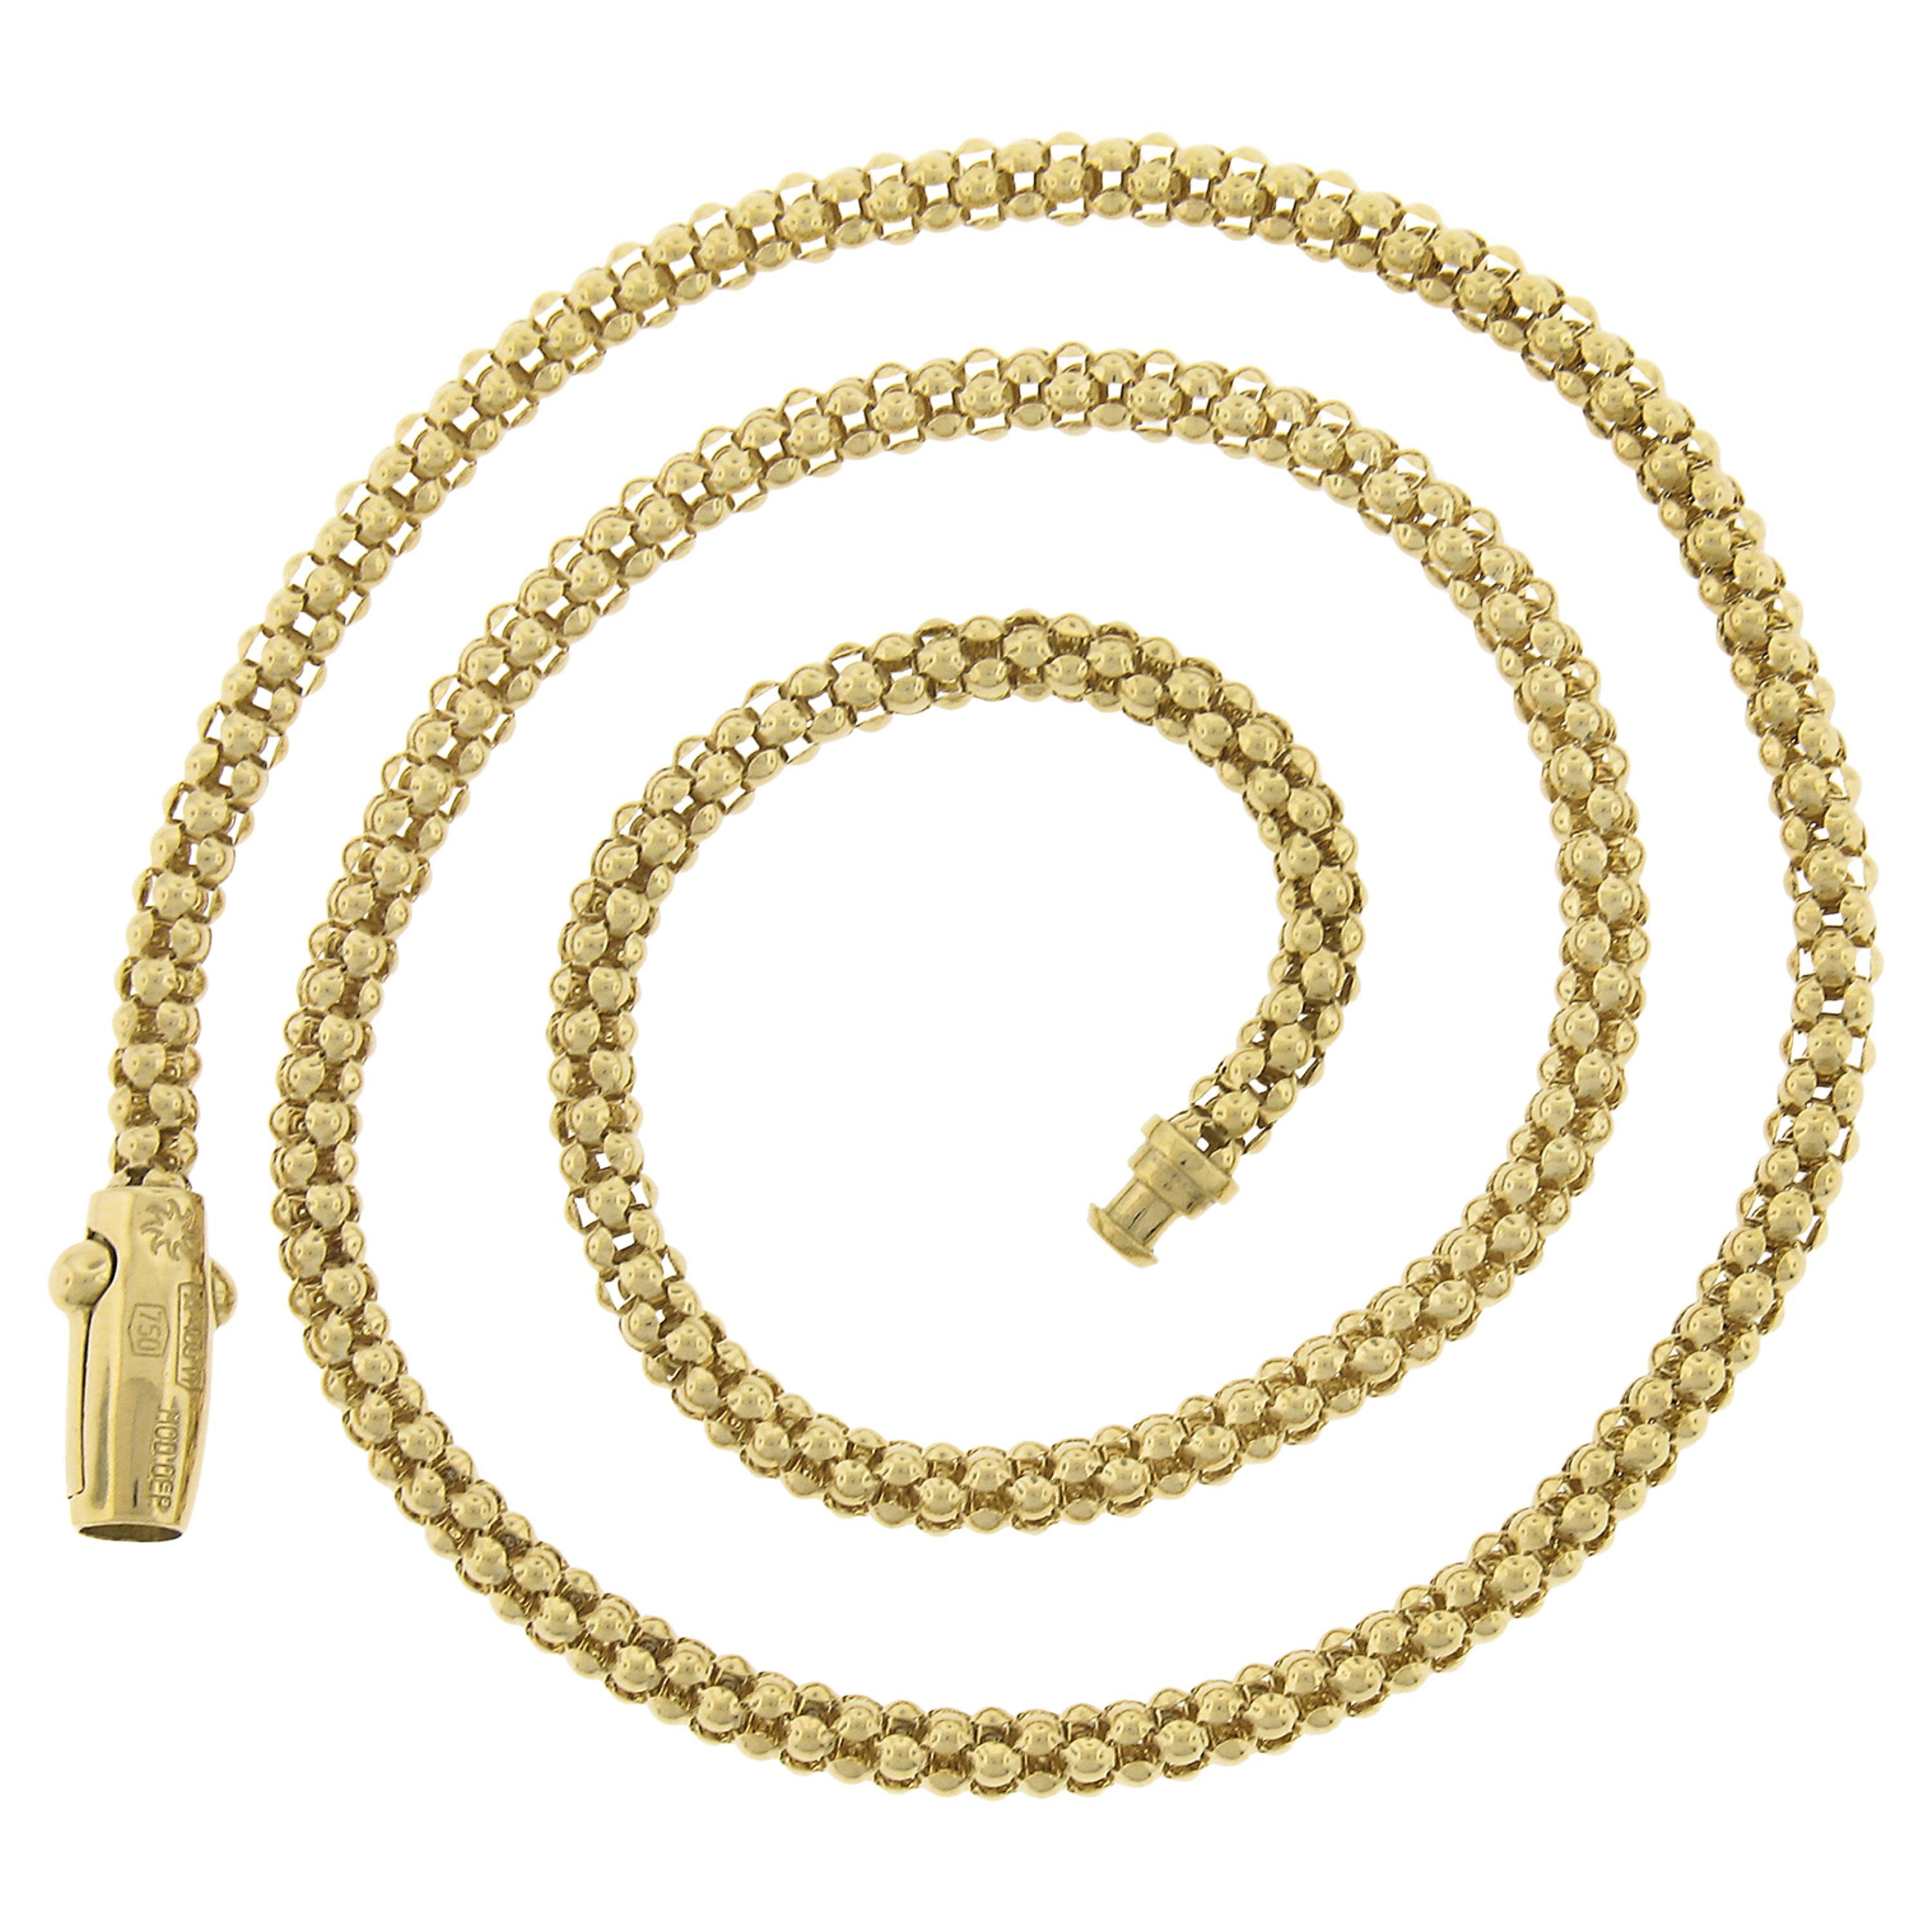 Chimento Solid 18K Yellow Gold 17" Popcorn Link Chain Necklace w/ Barrel Clasp